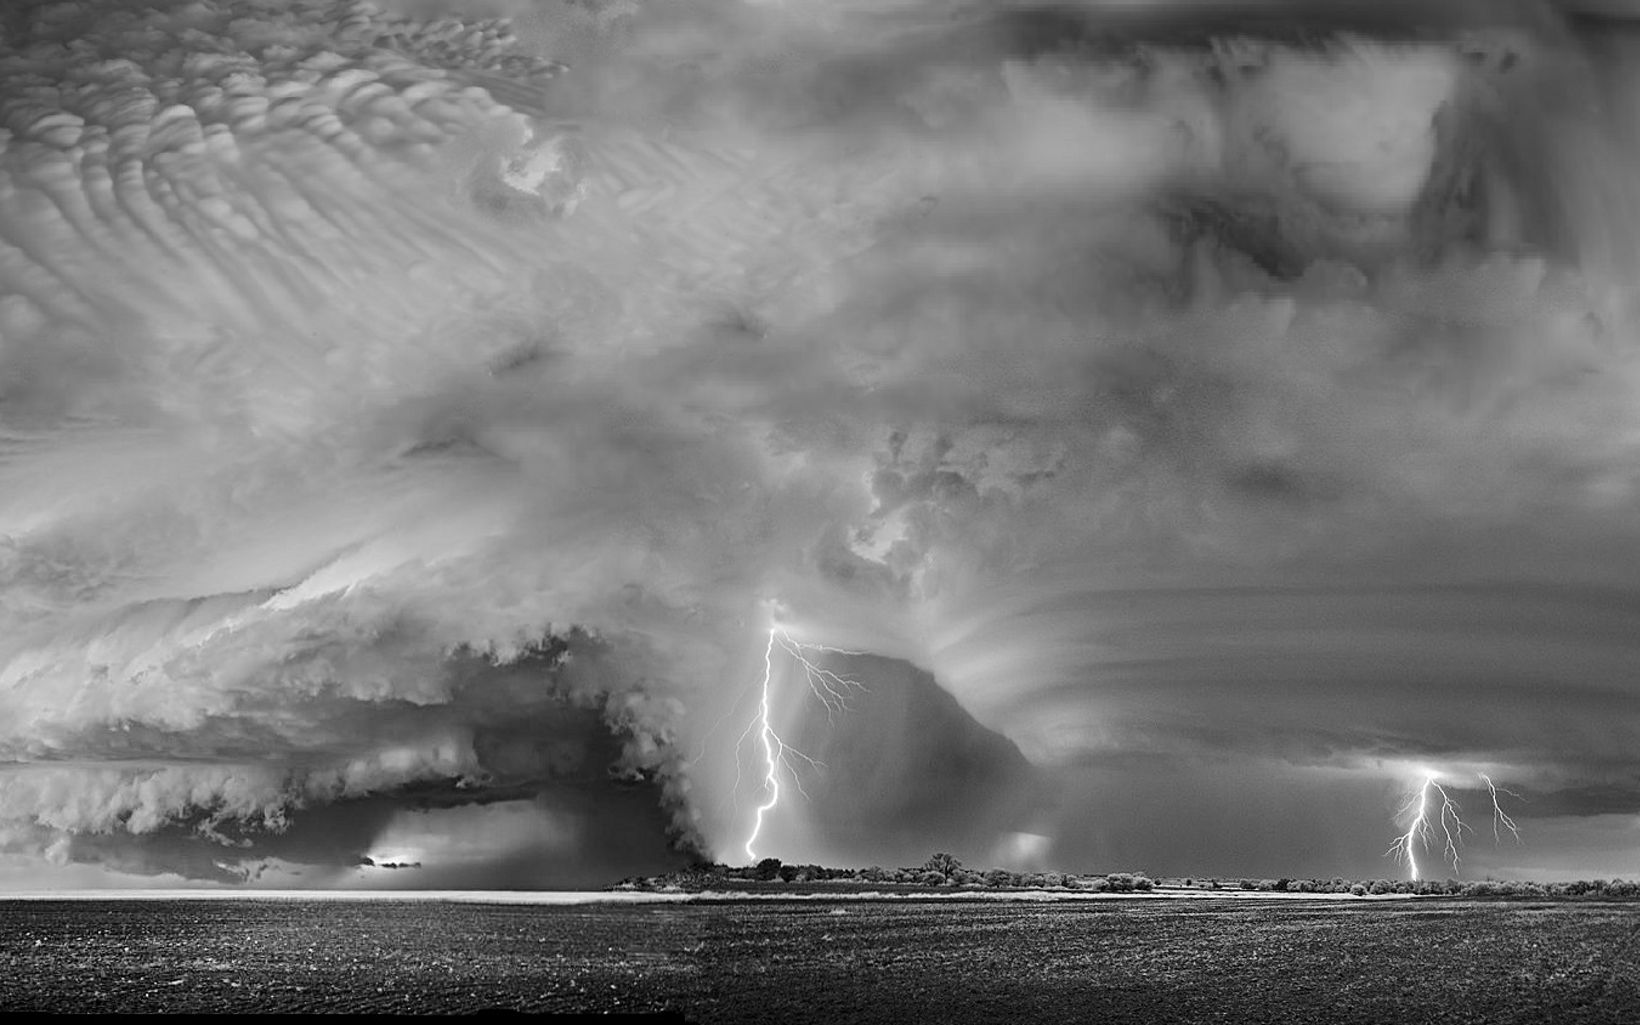  Summer storm in the Pampa Knowing the natural facts, allows us to understand its magnitude © Miguel Adalberto Jakubiec/TNC